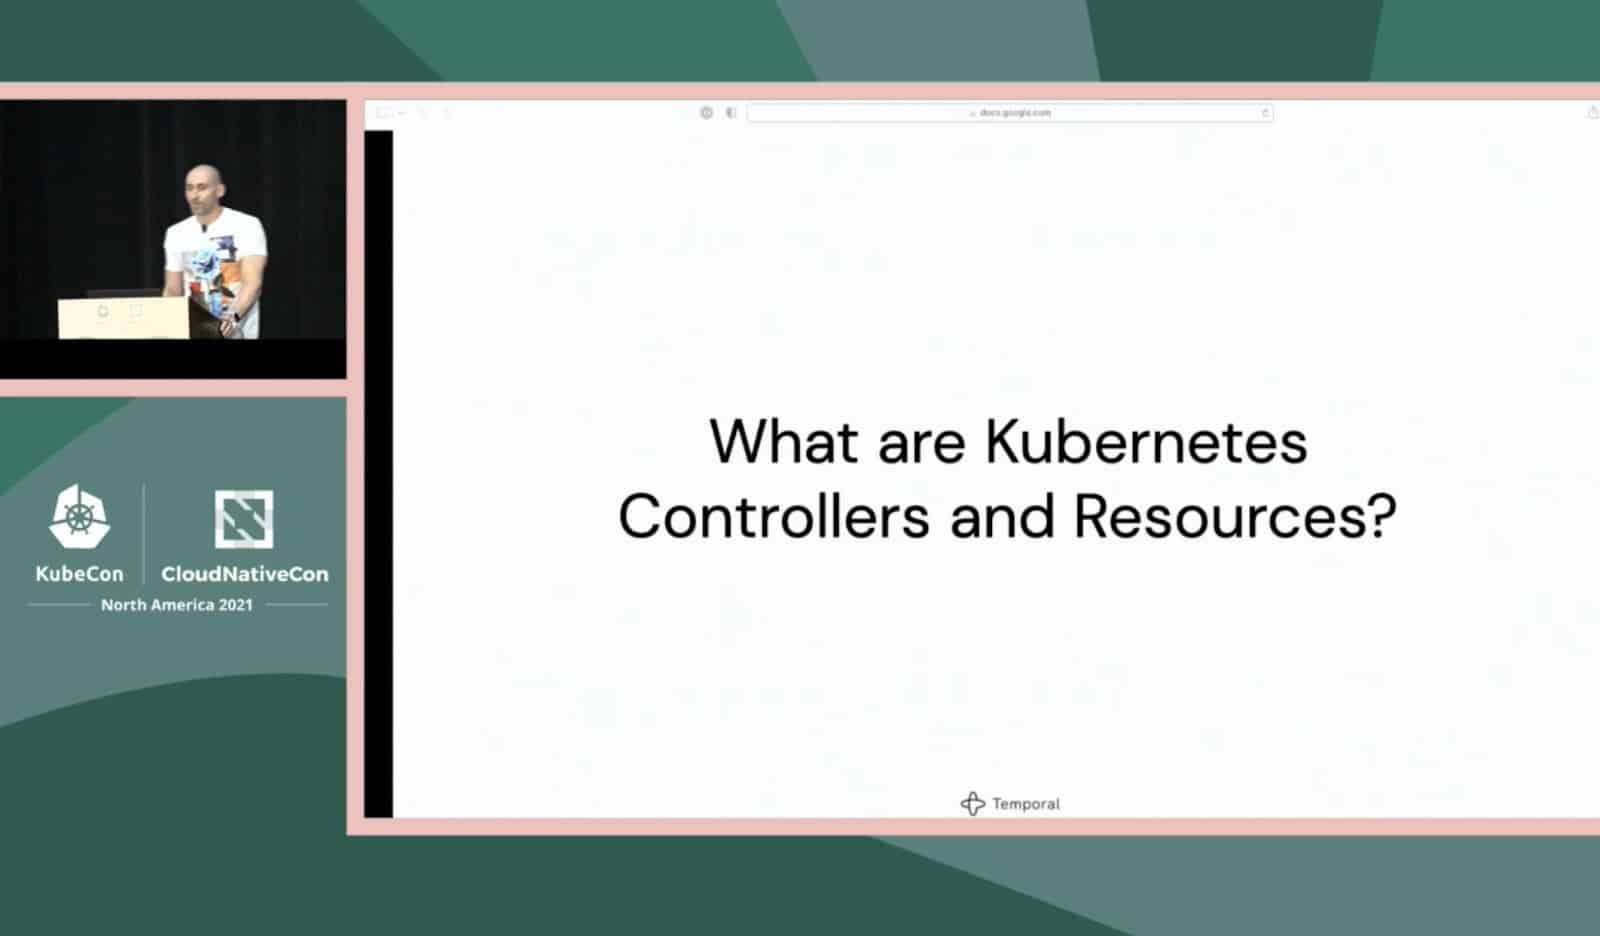 Screenshot of Dominik Tornow presenting What are Kubernetes Controllers and Resources at PromCon North America 2021 event